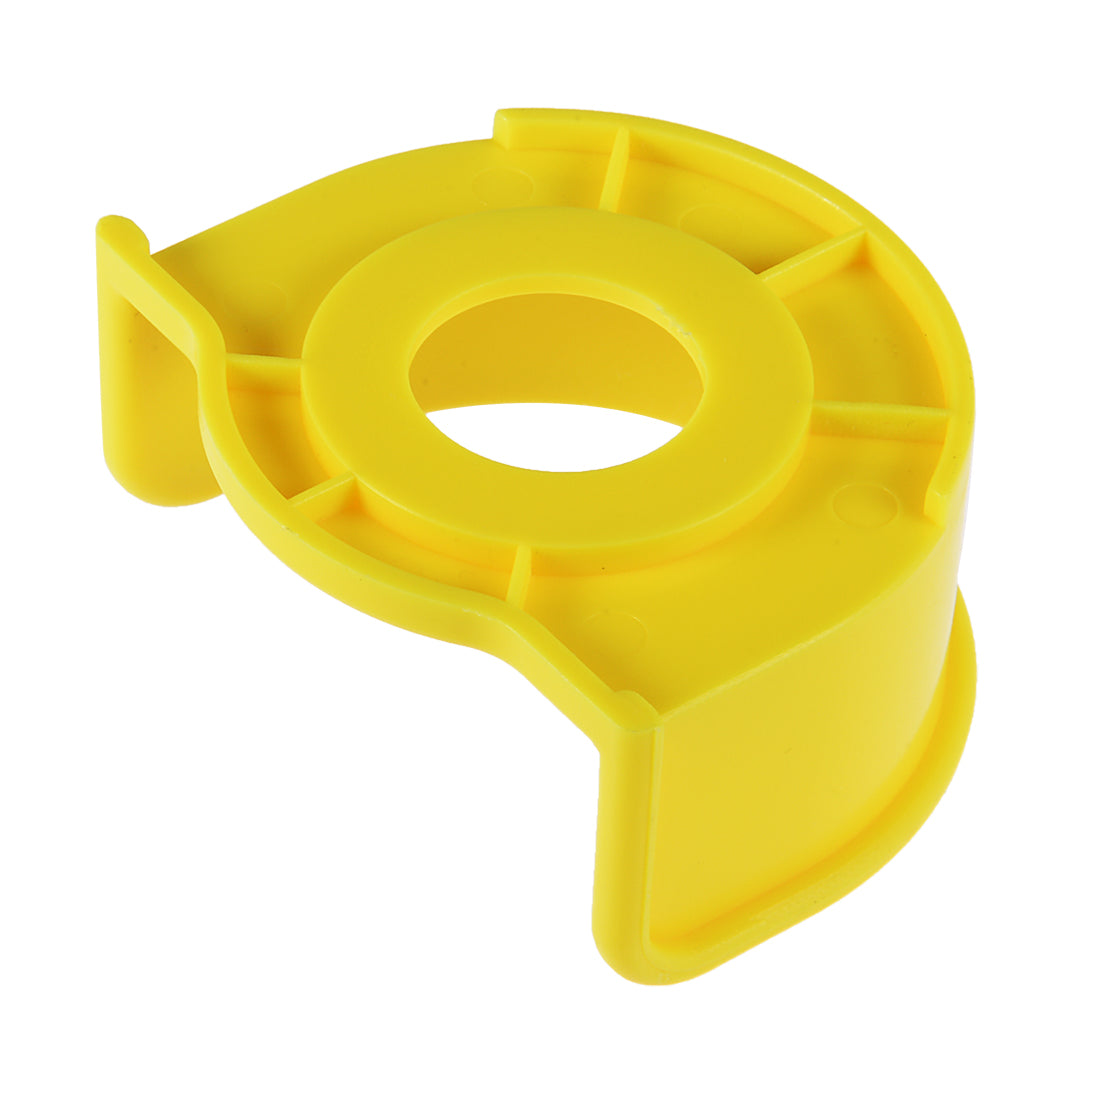 uxcell Uxcell 1Pcs, 22mm Plastic Half Circle Push Switch Button Protective Cover Yellow